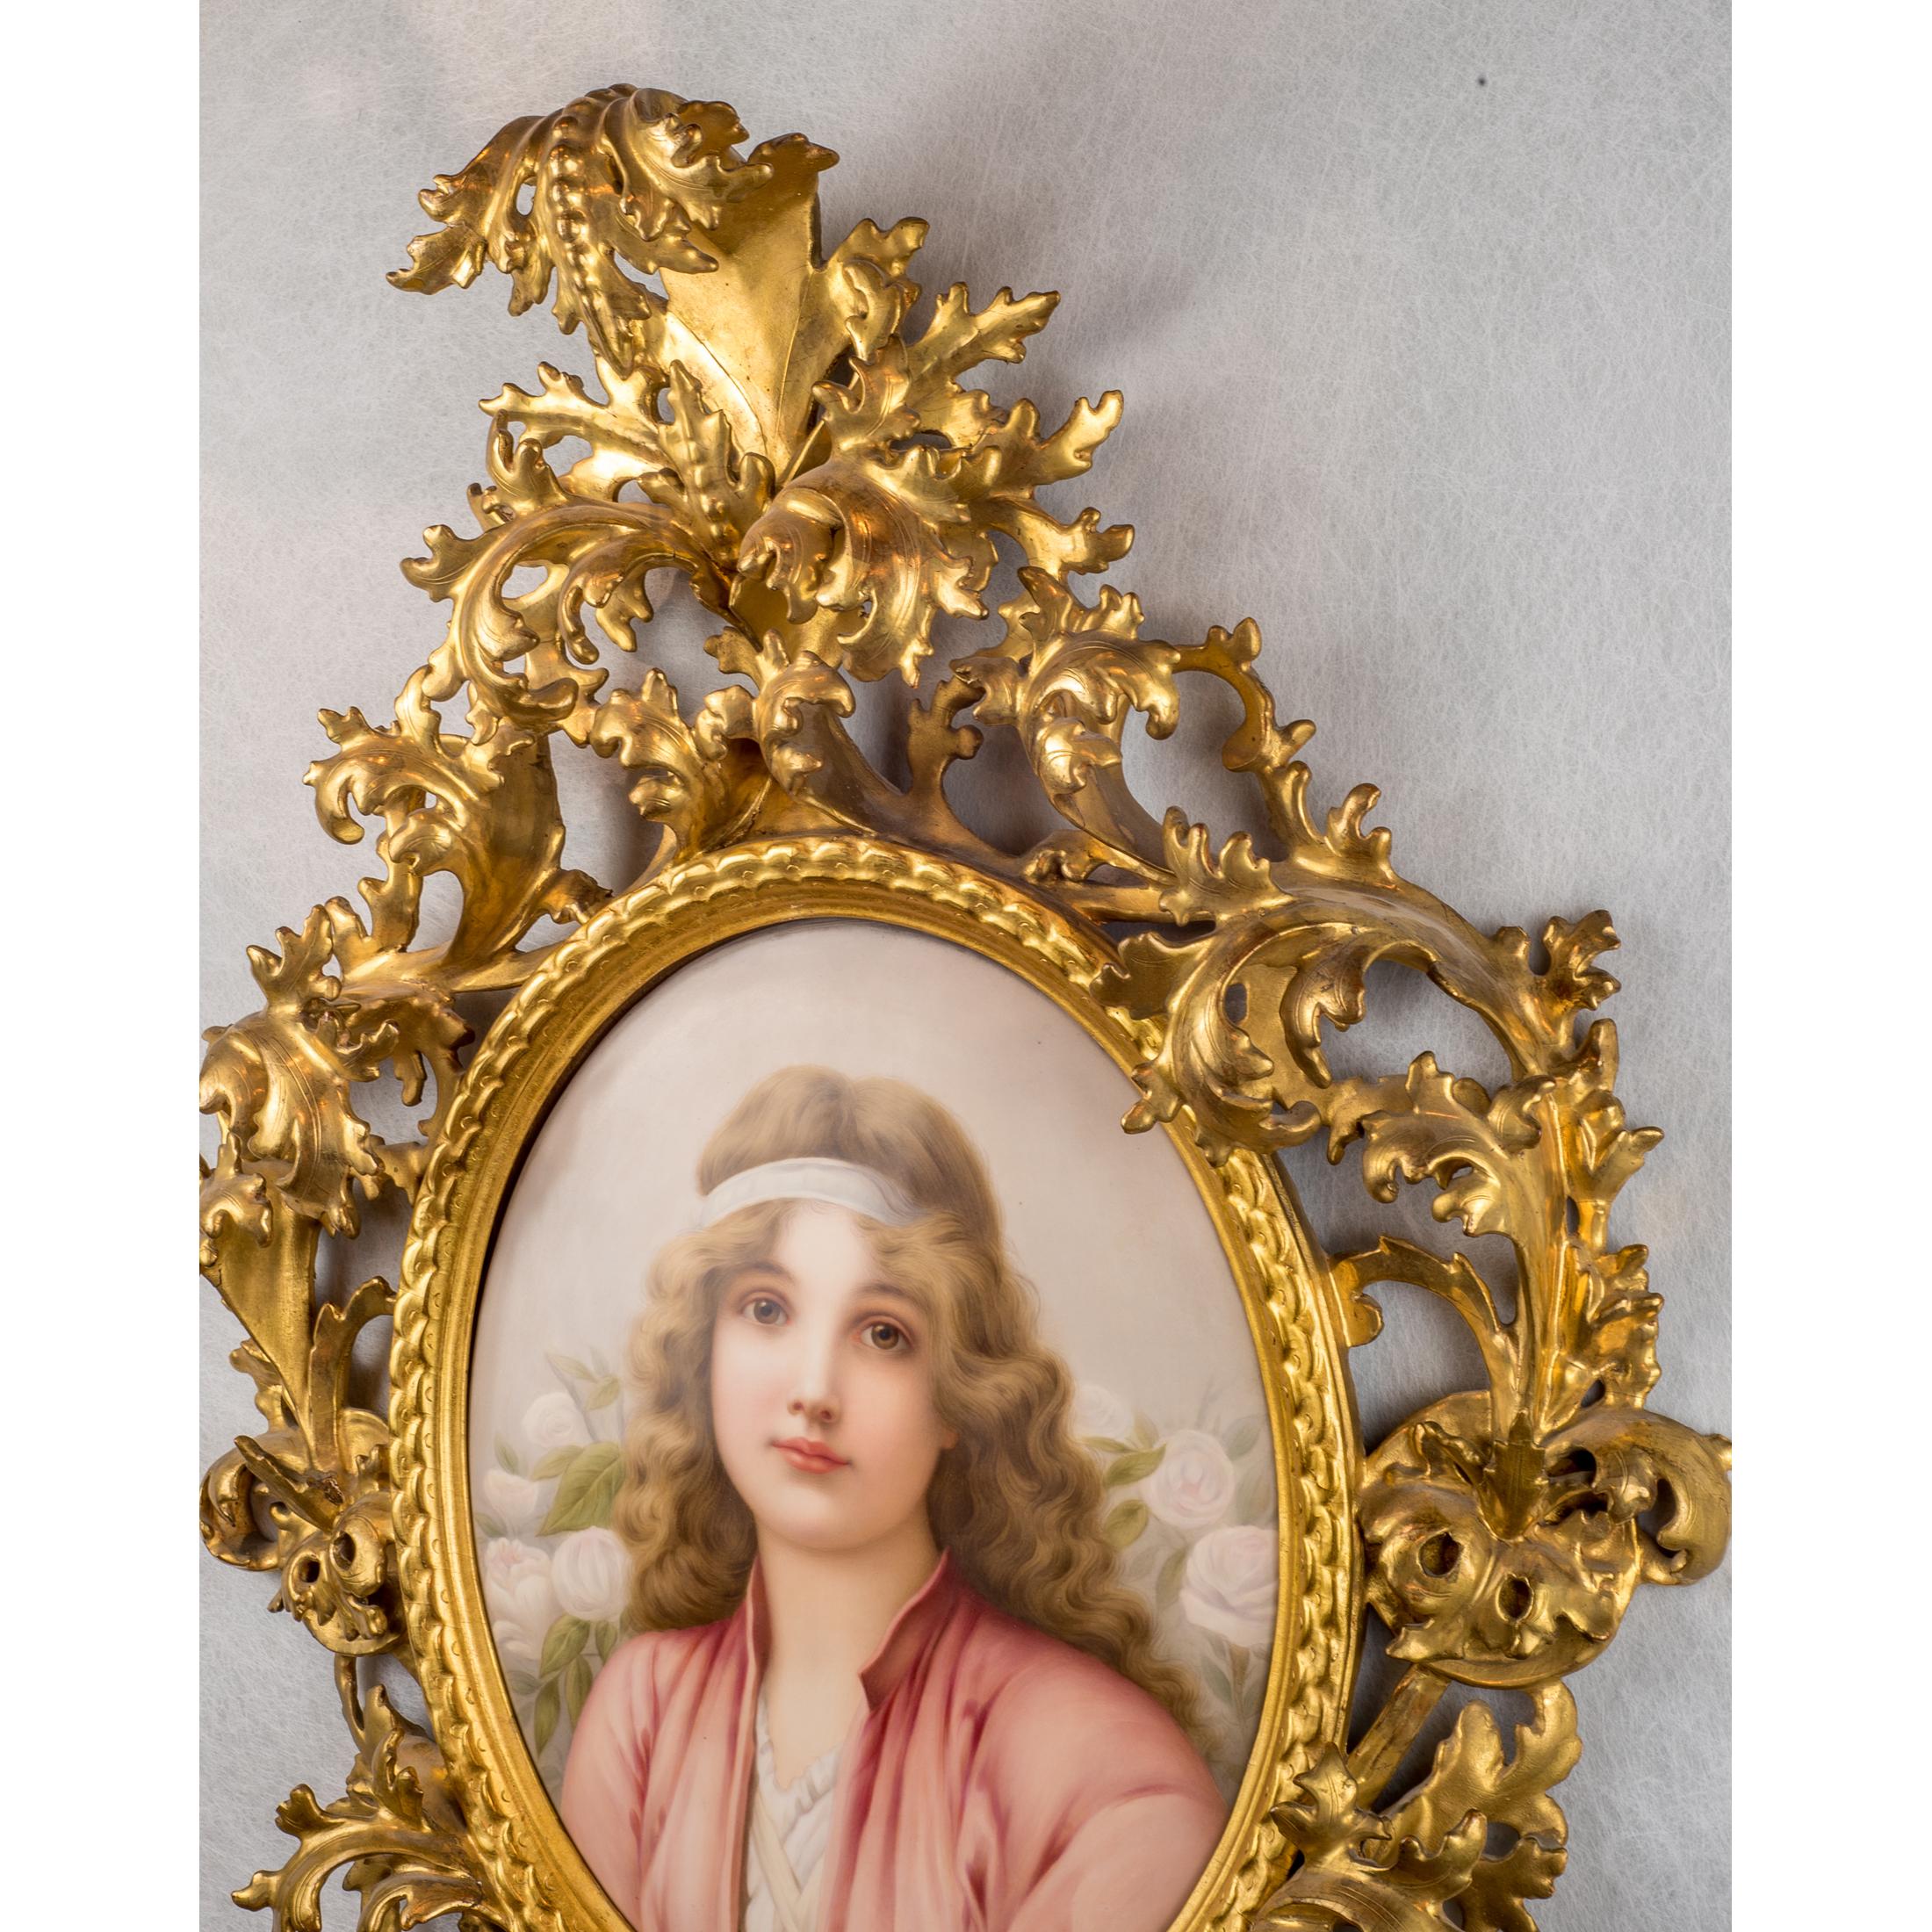 KPM Porcelain Plaque
German, 19th century

Beauty with headband

Signed Greiner

Painted plaque
Measures: 13 1/4 in. x 11 1/4 in.